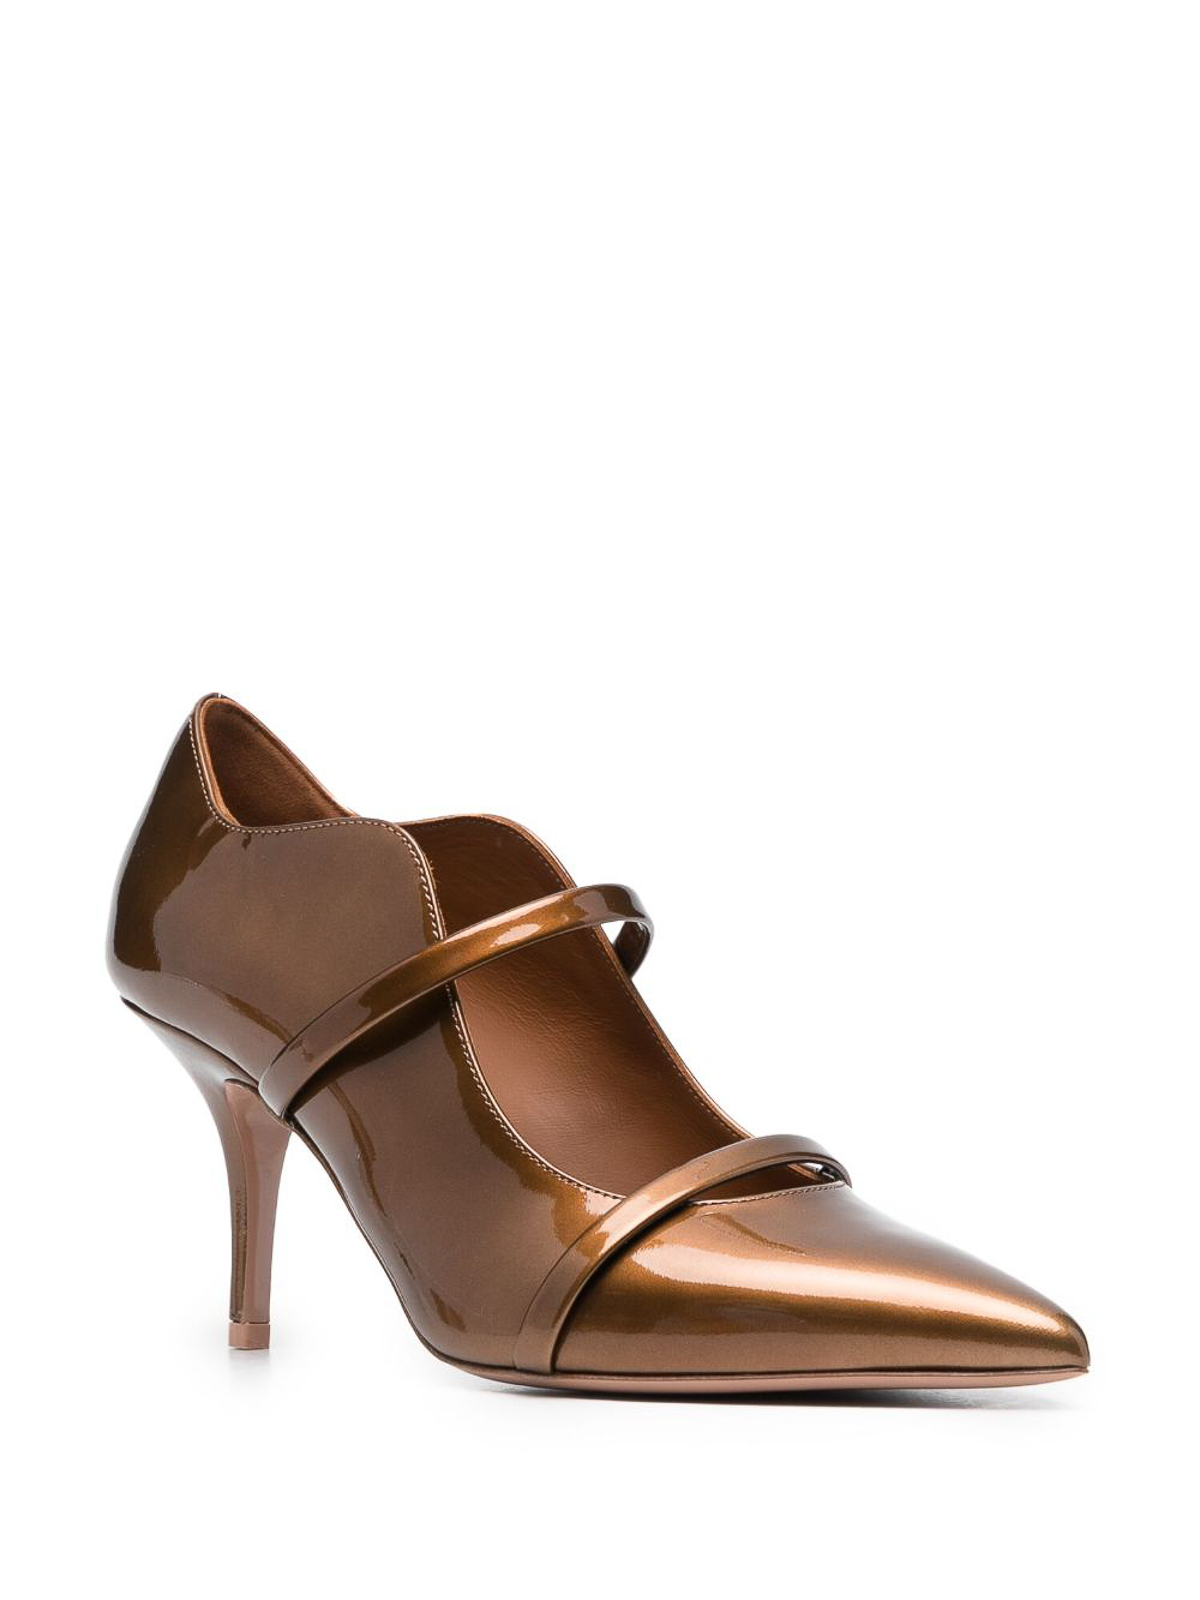 Shop Malone Souliers Maureen Metallic Patent Leather Pumps In Marrón